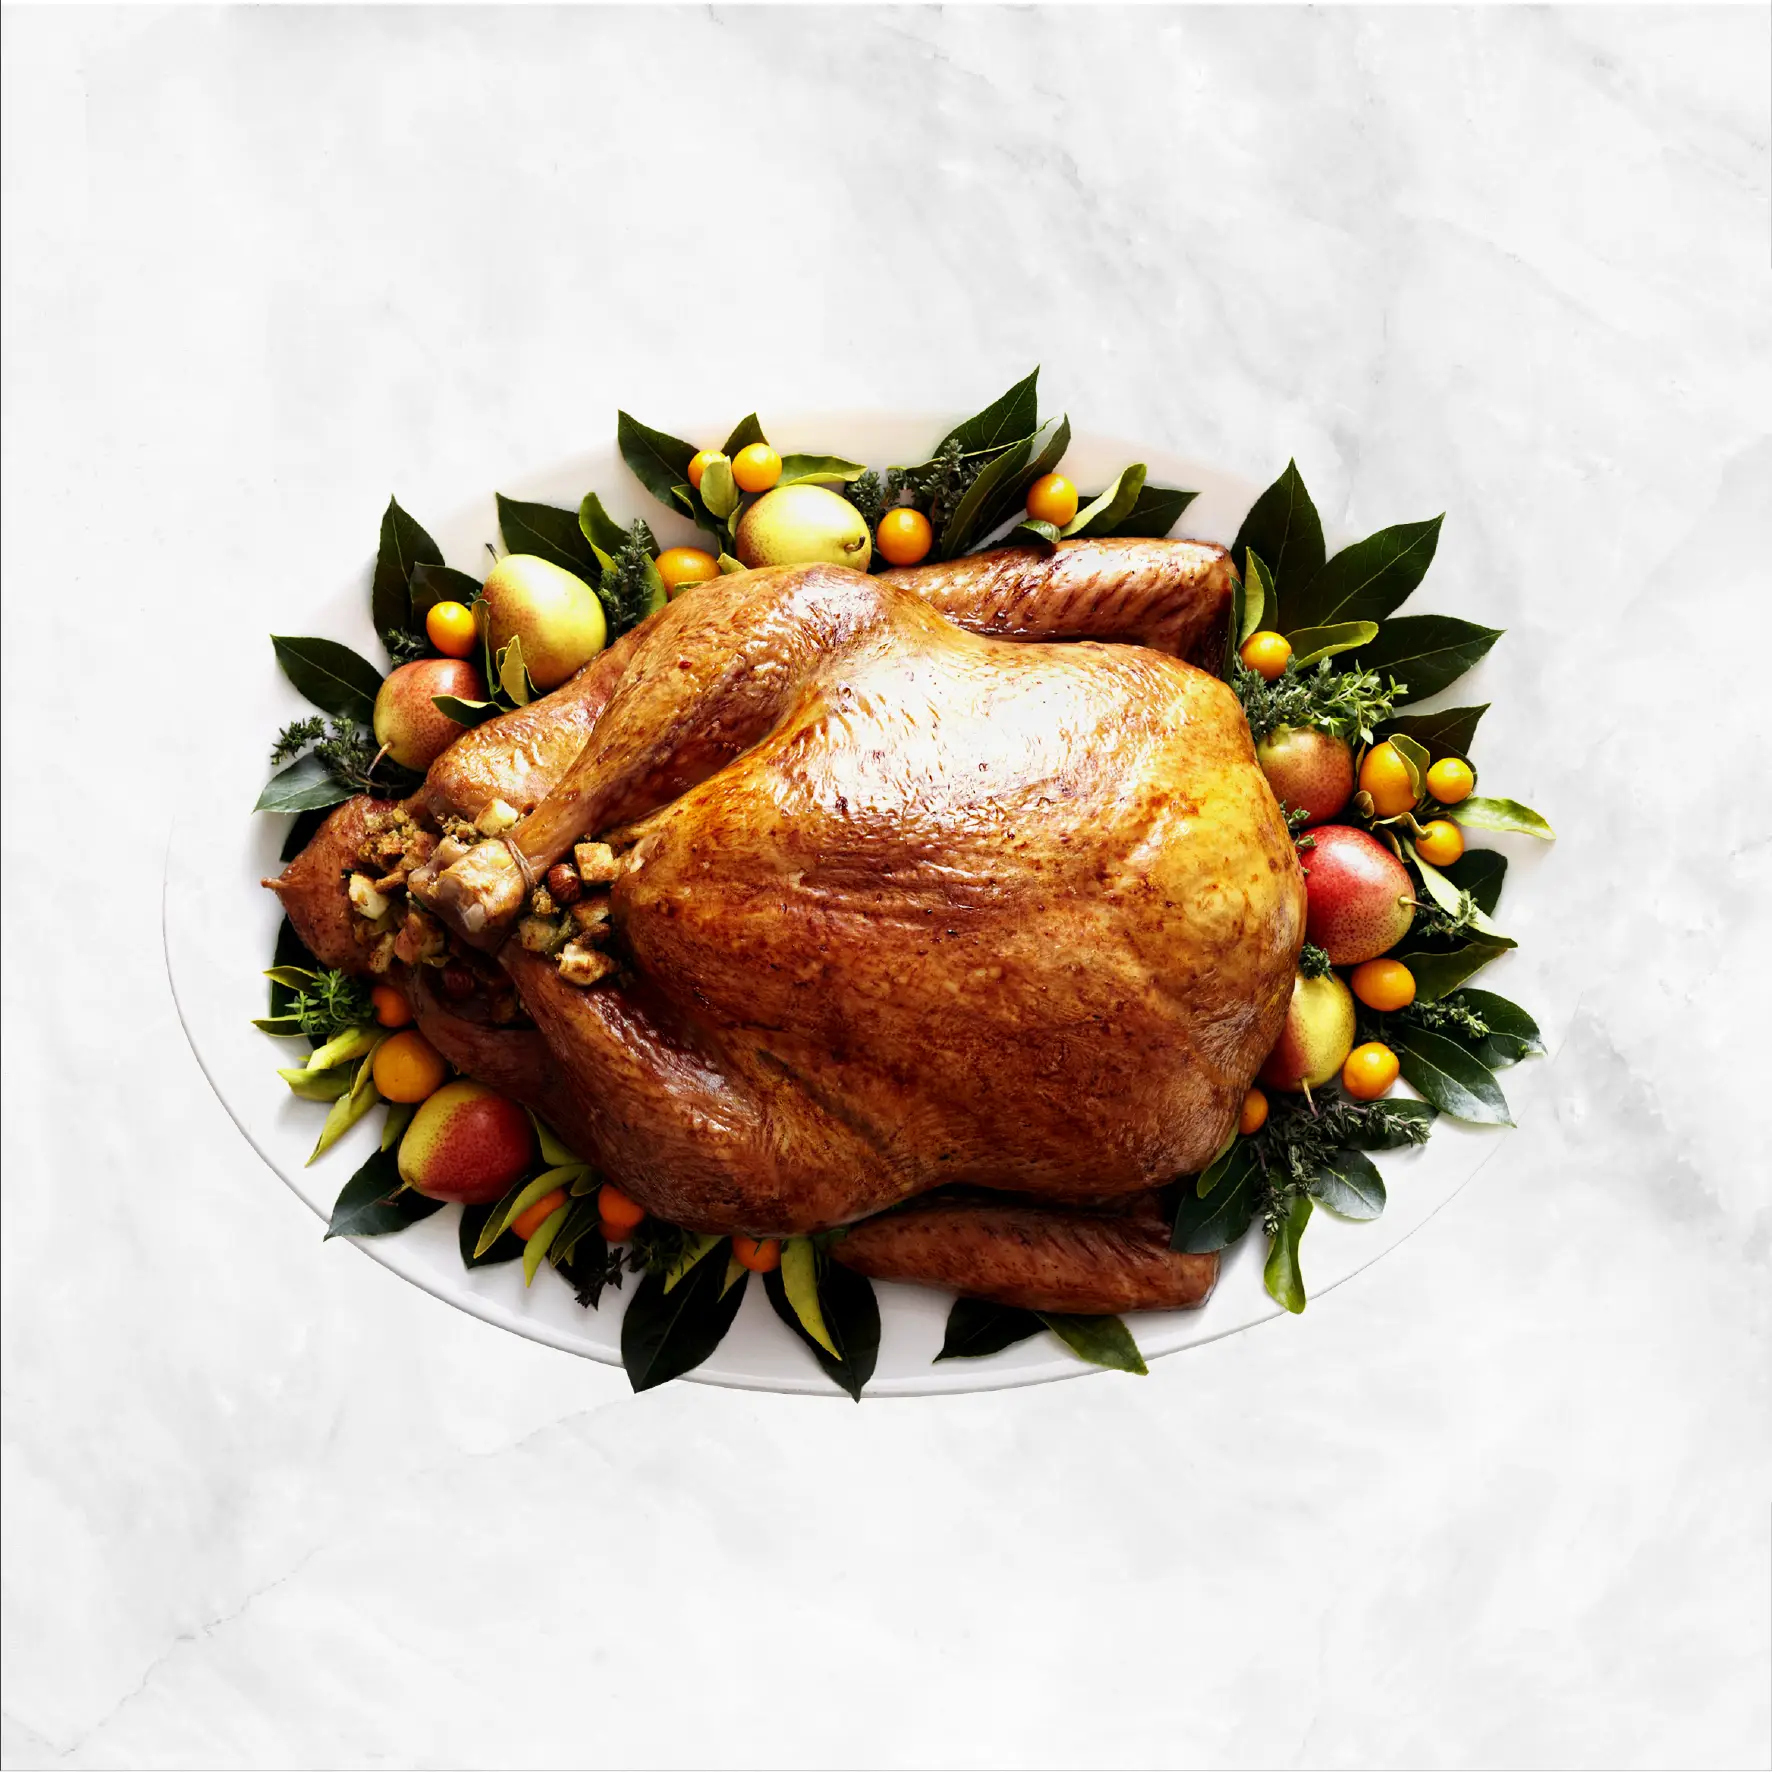 Nitrate-Free Smoked Whole Turkey Delivery